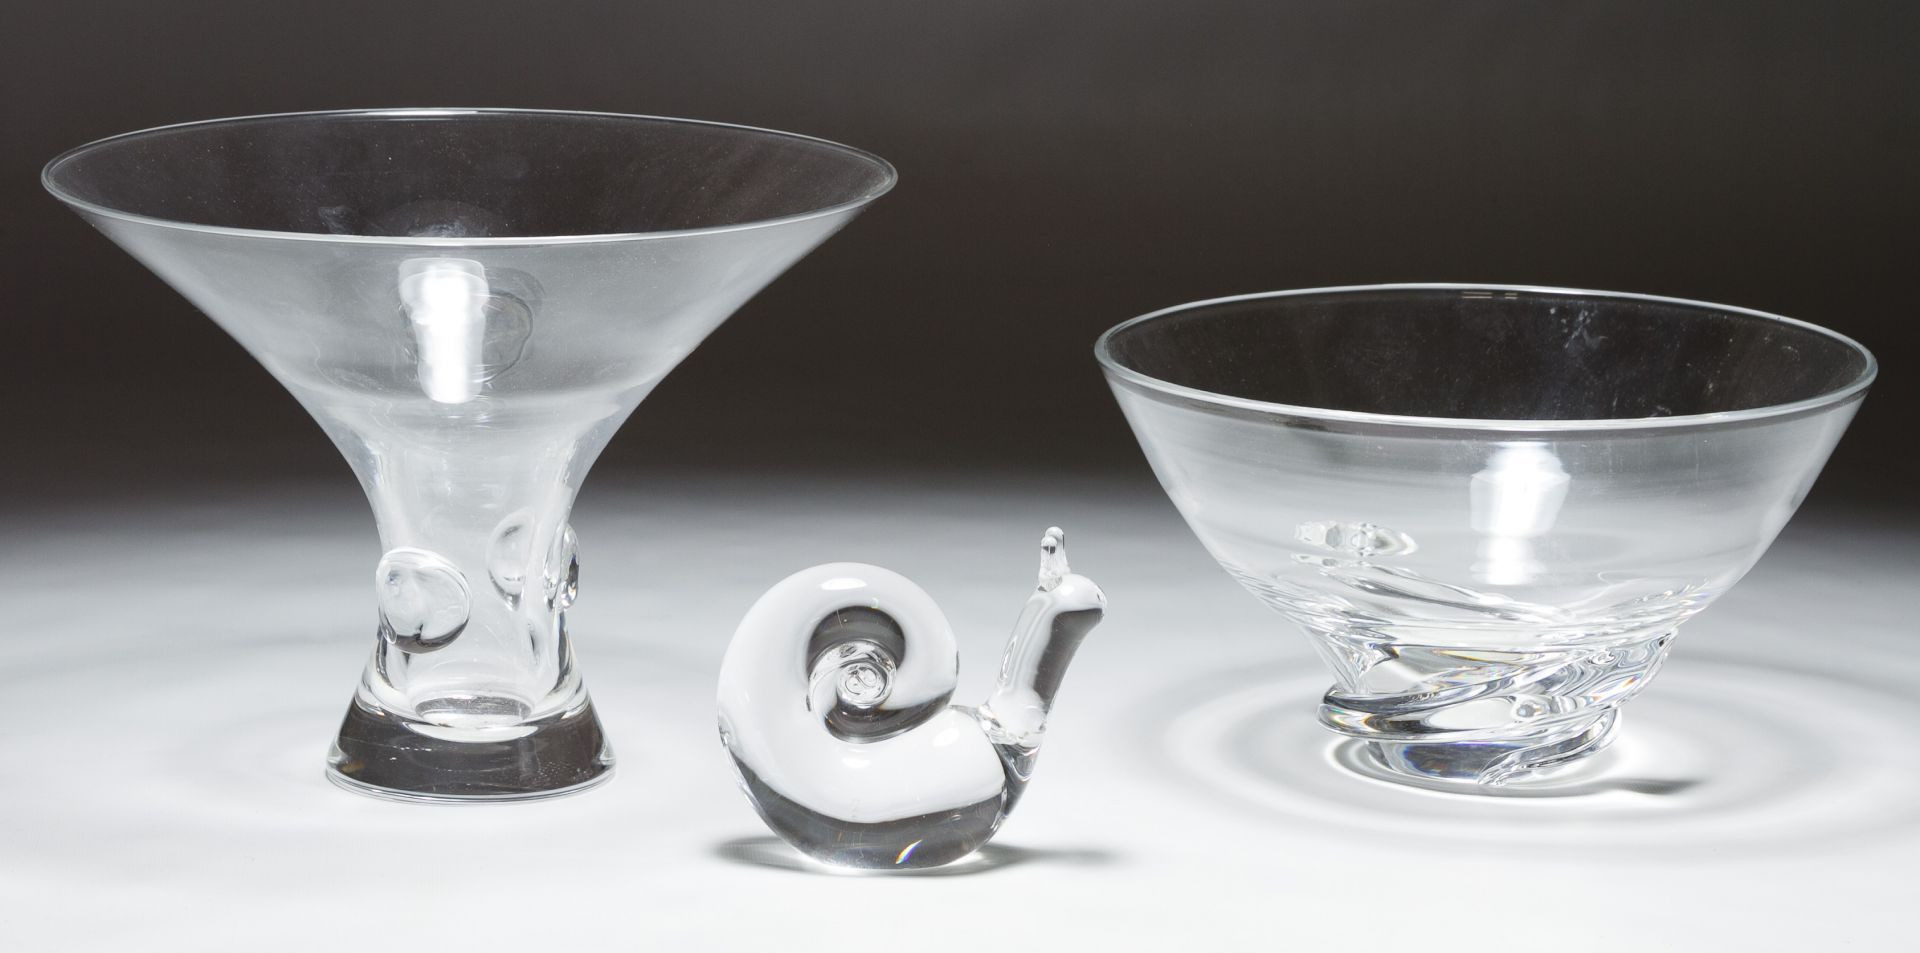 21 Great Steuben Crystal Vase 2024 free download steuben crystal vase of lot 609 steuben bowl and snail figurine assortment three steuben with regard to lot 609 steuben bowl and snail figurine assortment three steuben marked items includin